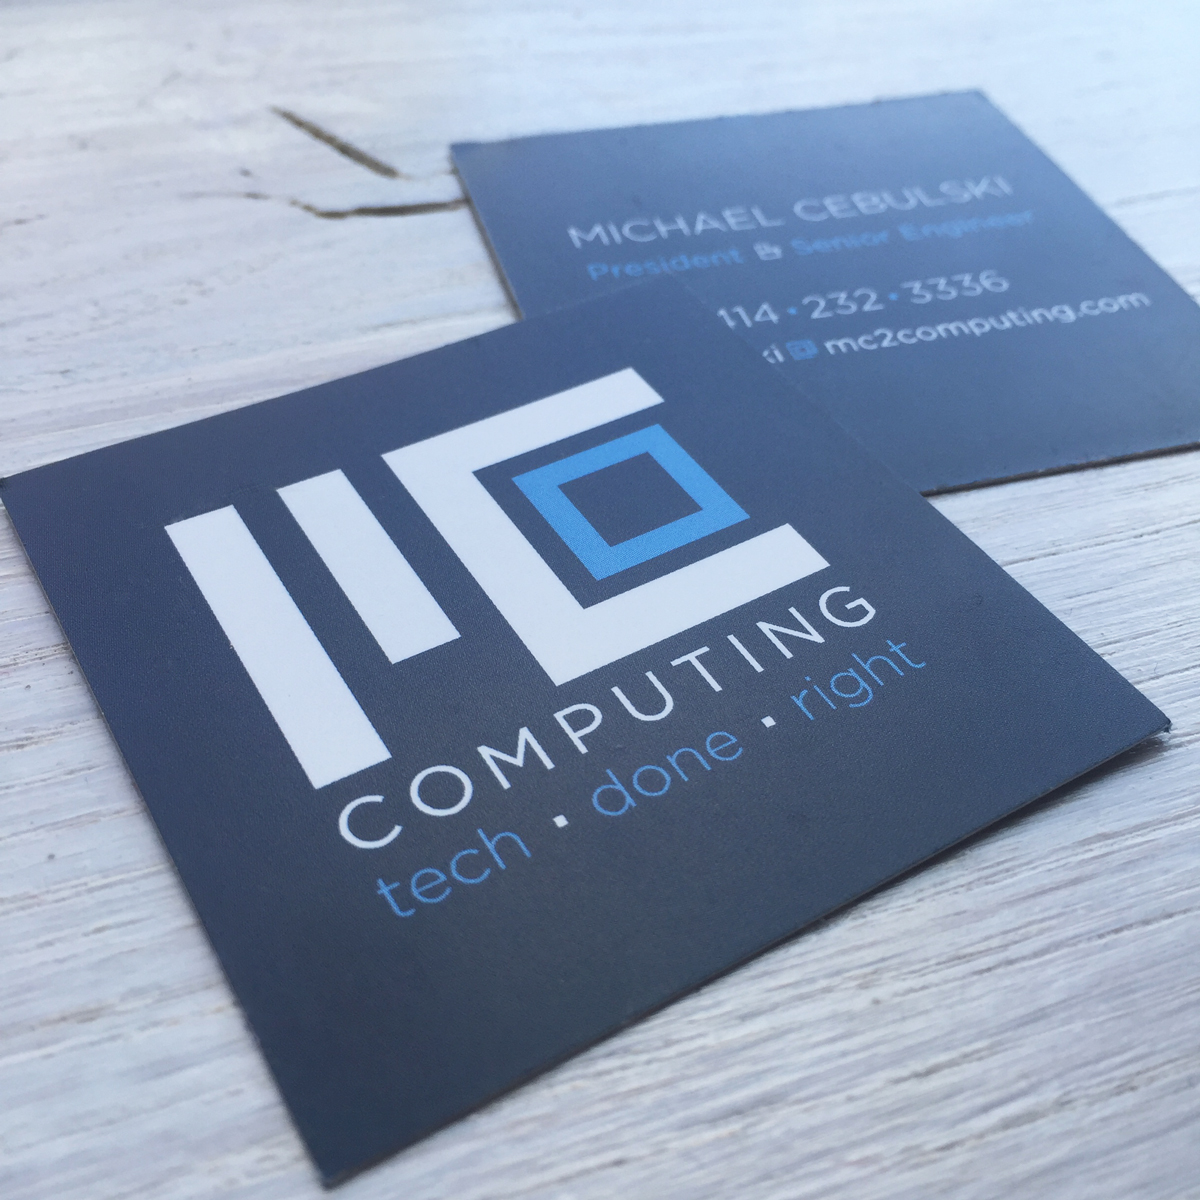 Rese-Designs_Chicago_MC2-Computing_business-cards.jpg